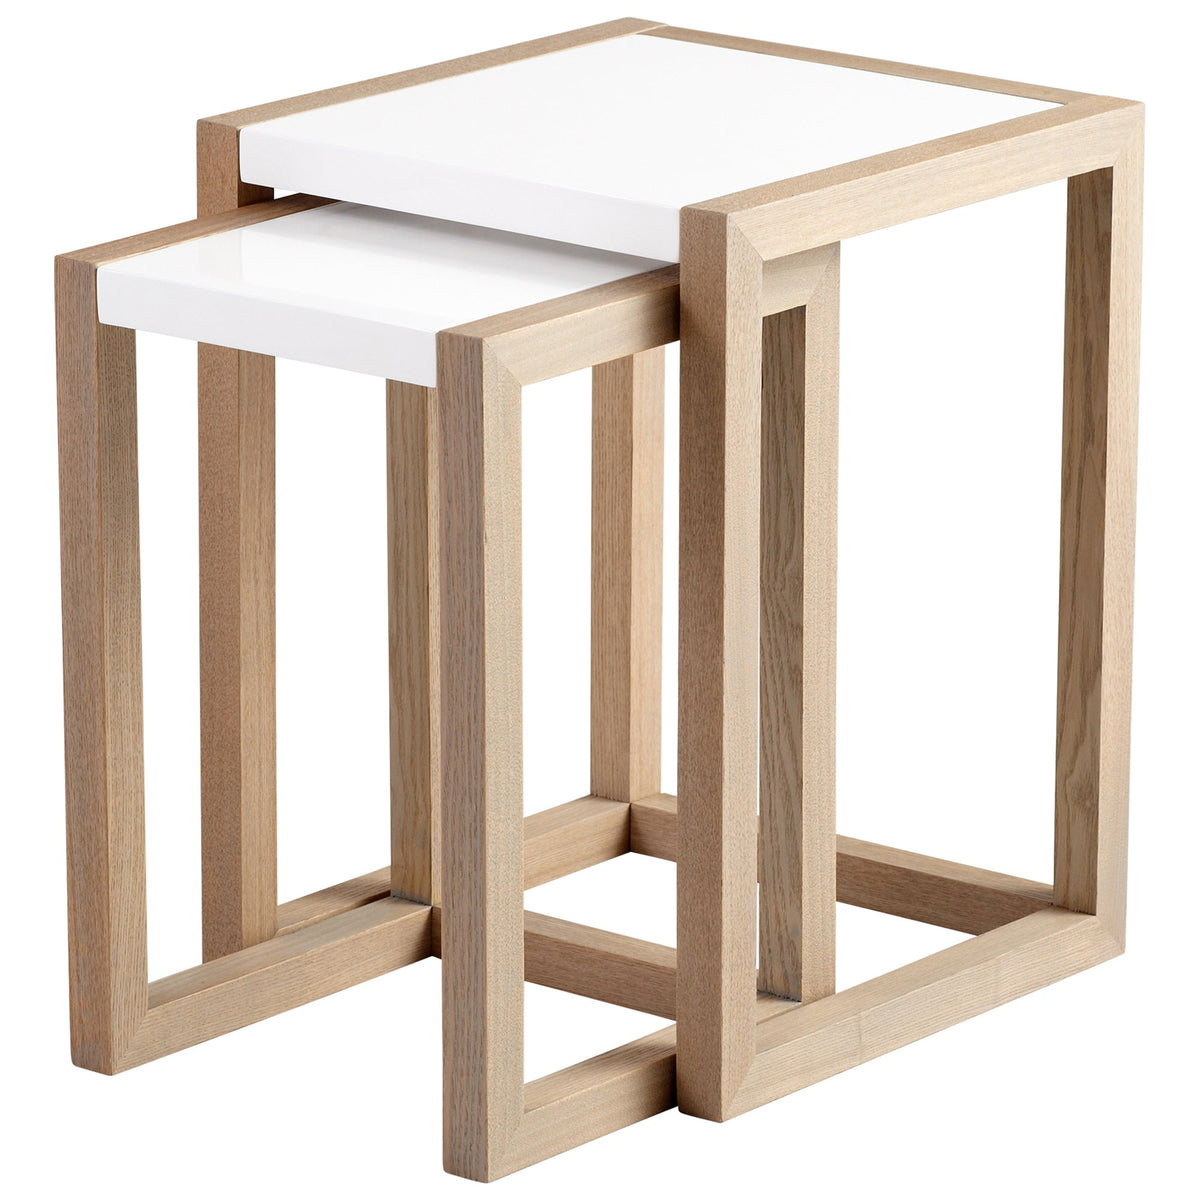 Becket Nesting Tables by Cyan